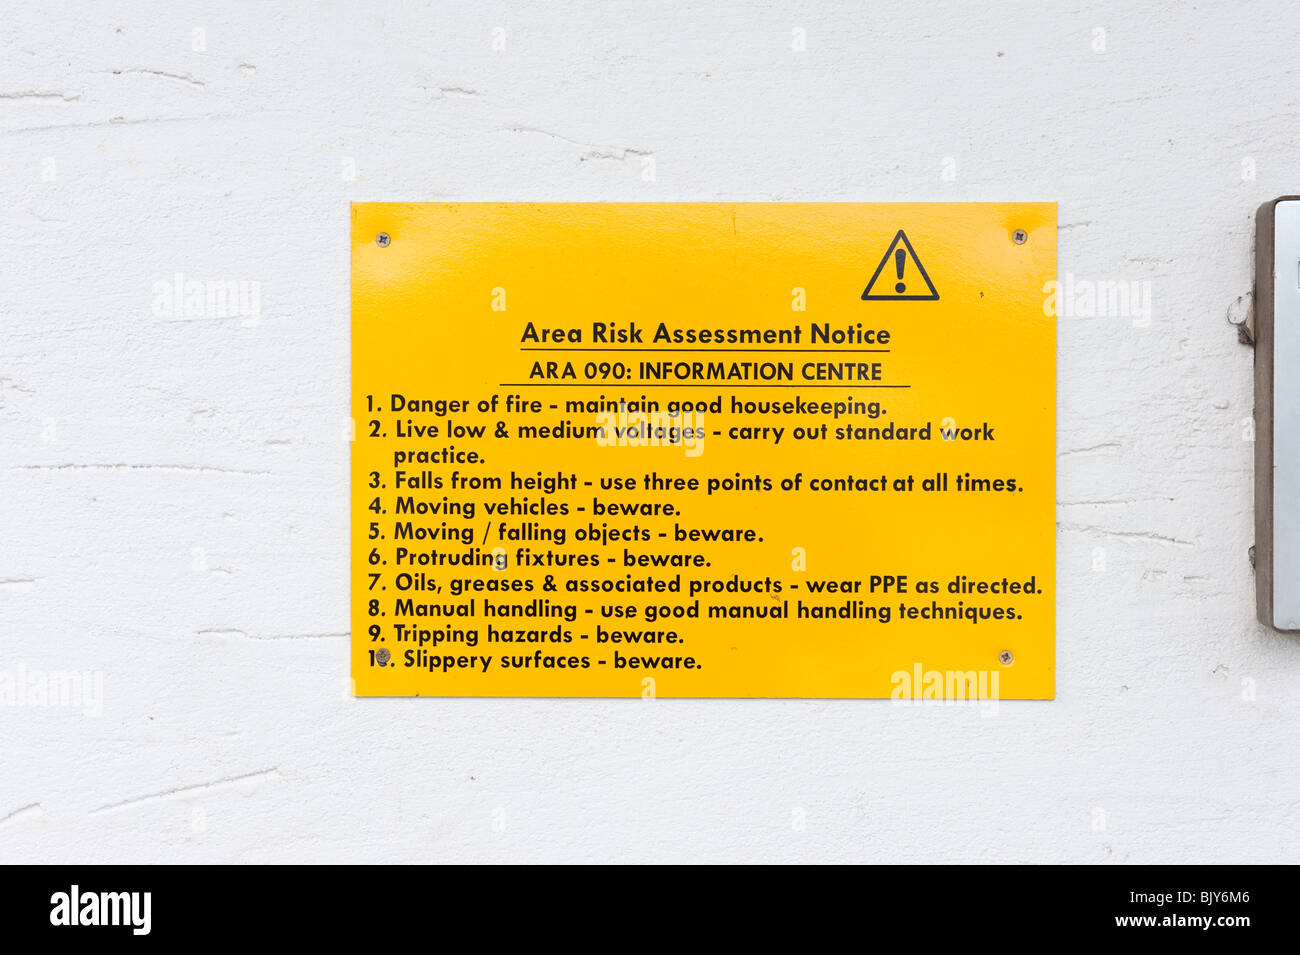 Area Risk Assessment ARA Wylfa Nuclear Power Station Visitors Centre Anglesey North Wales UK Stock Photo